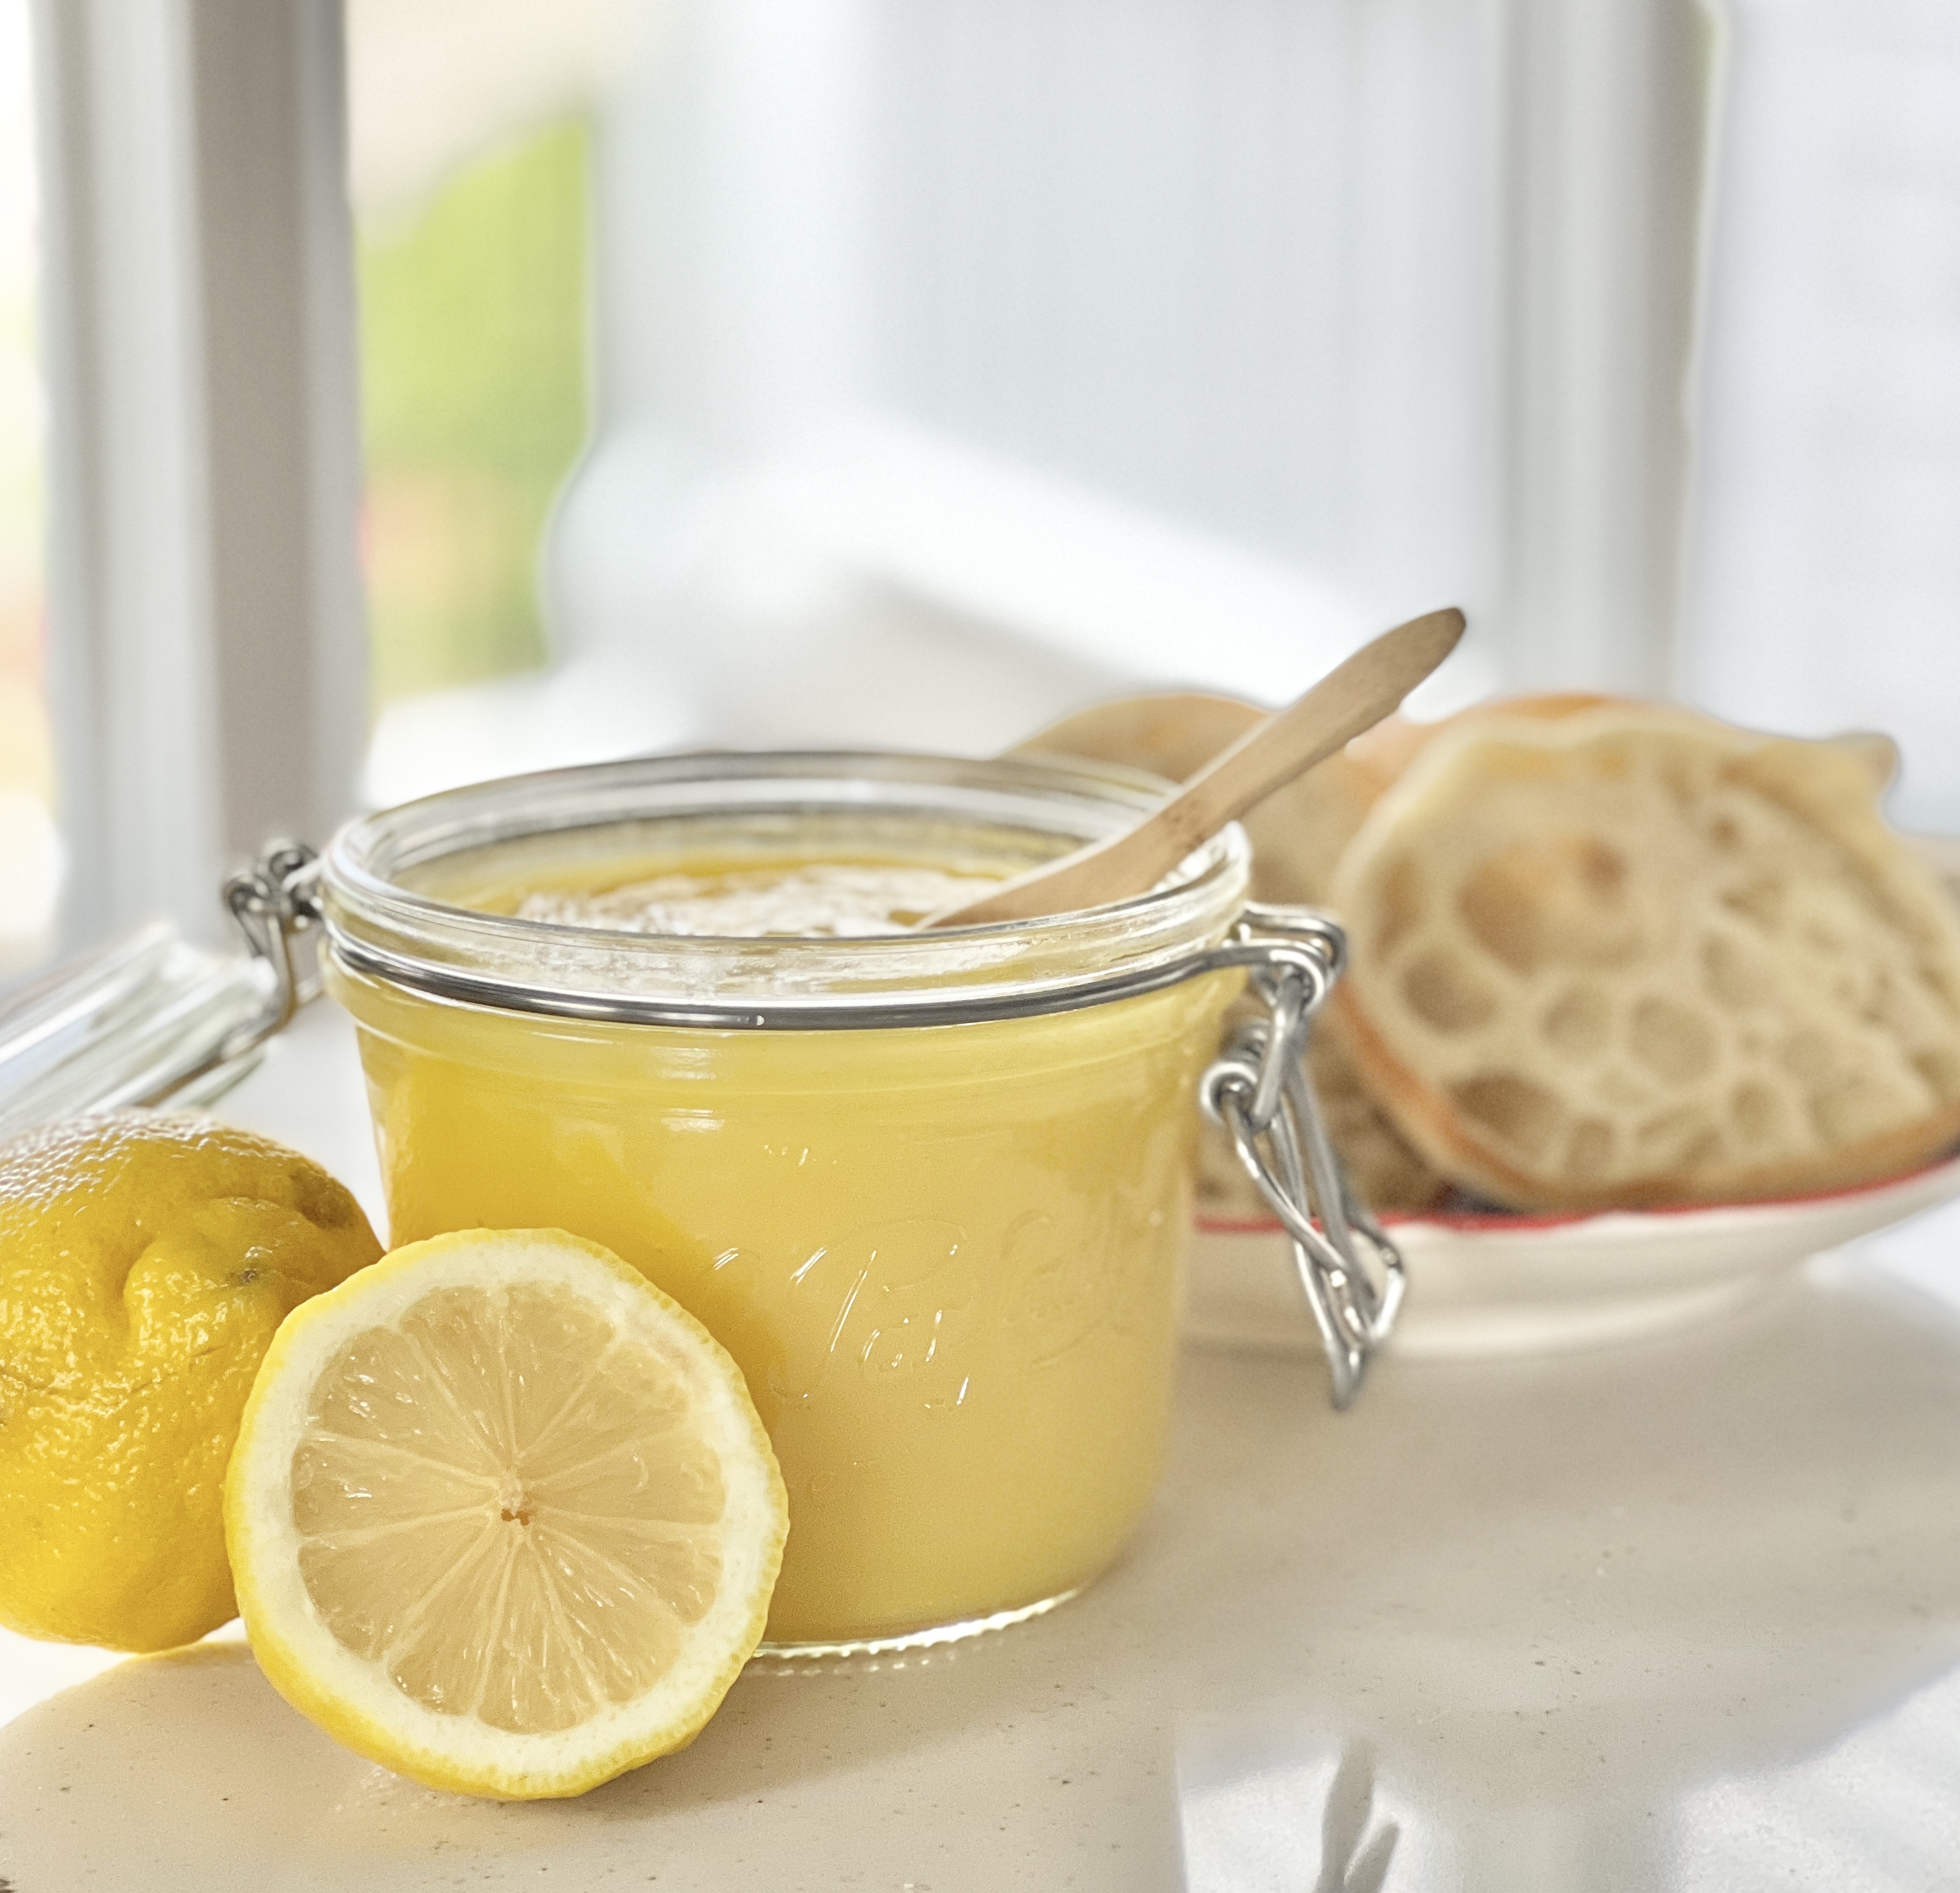 Lemon curd in a glass canister.